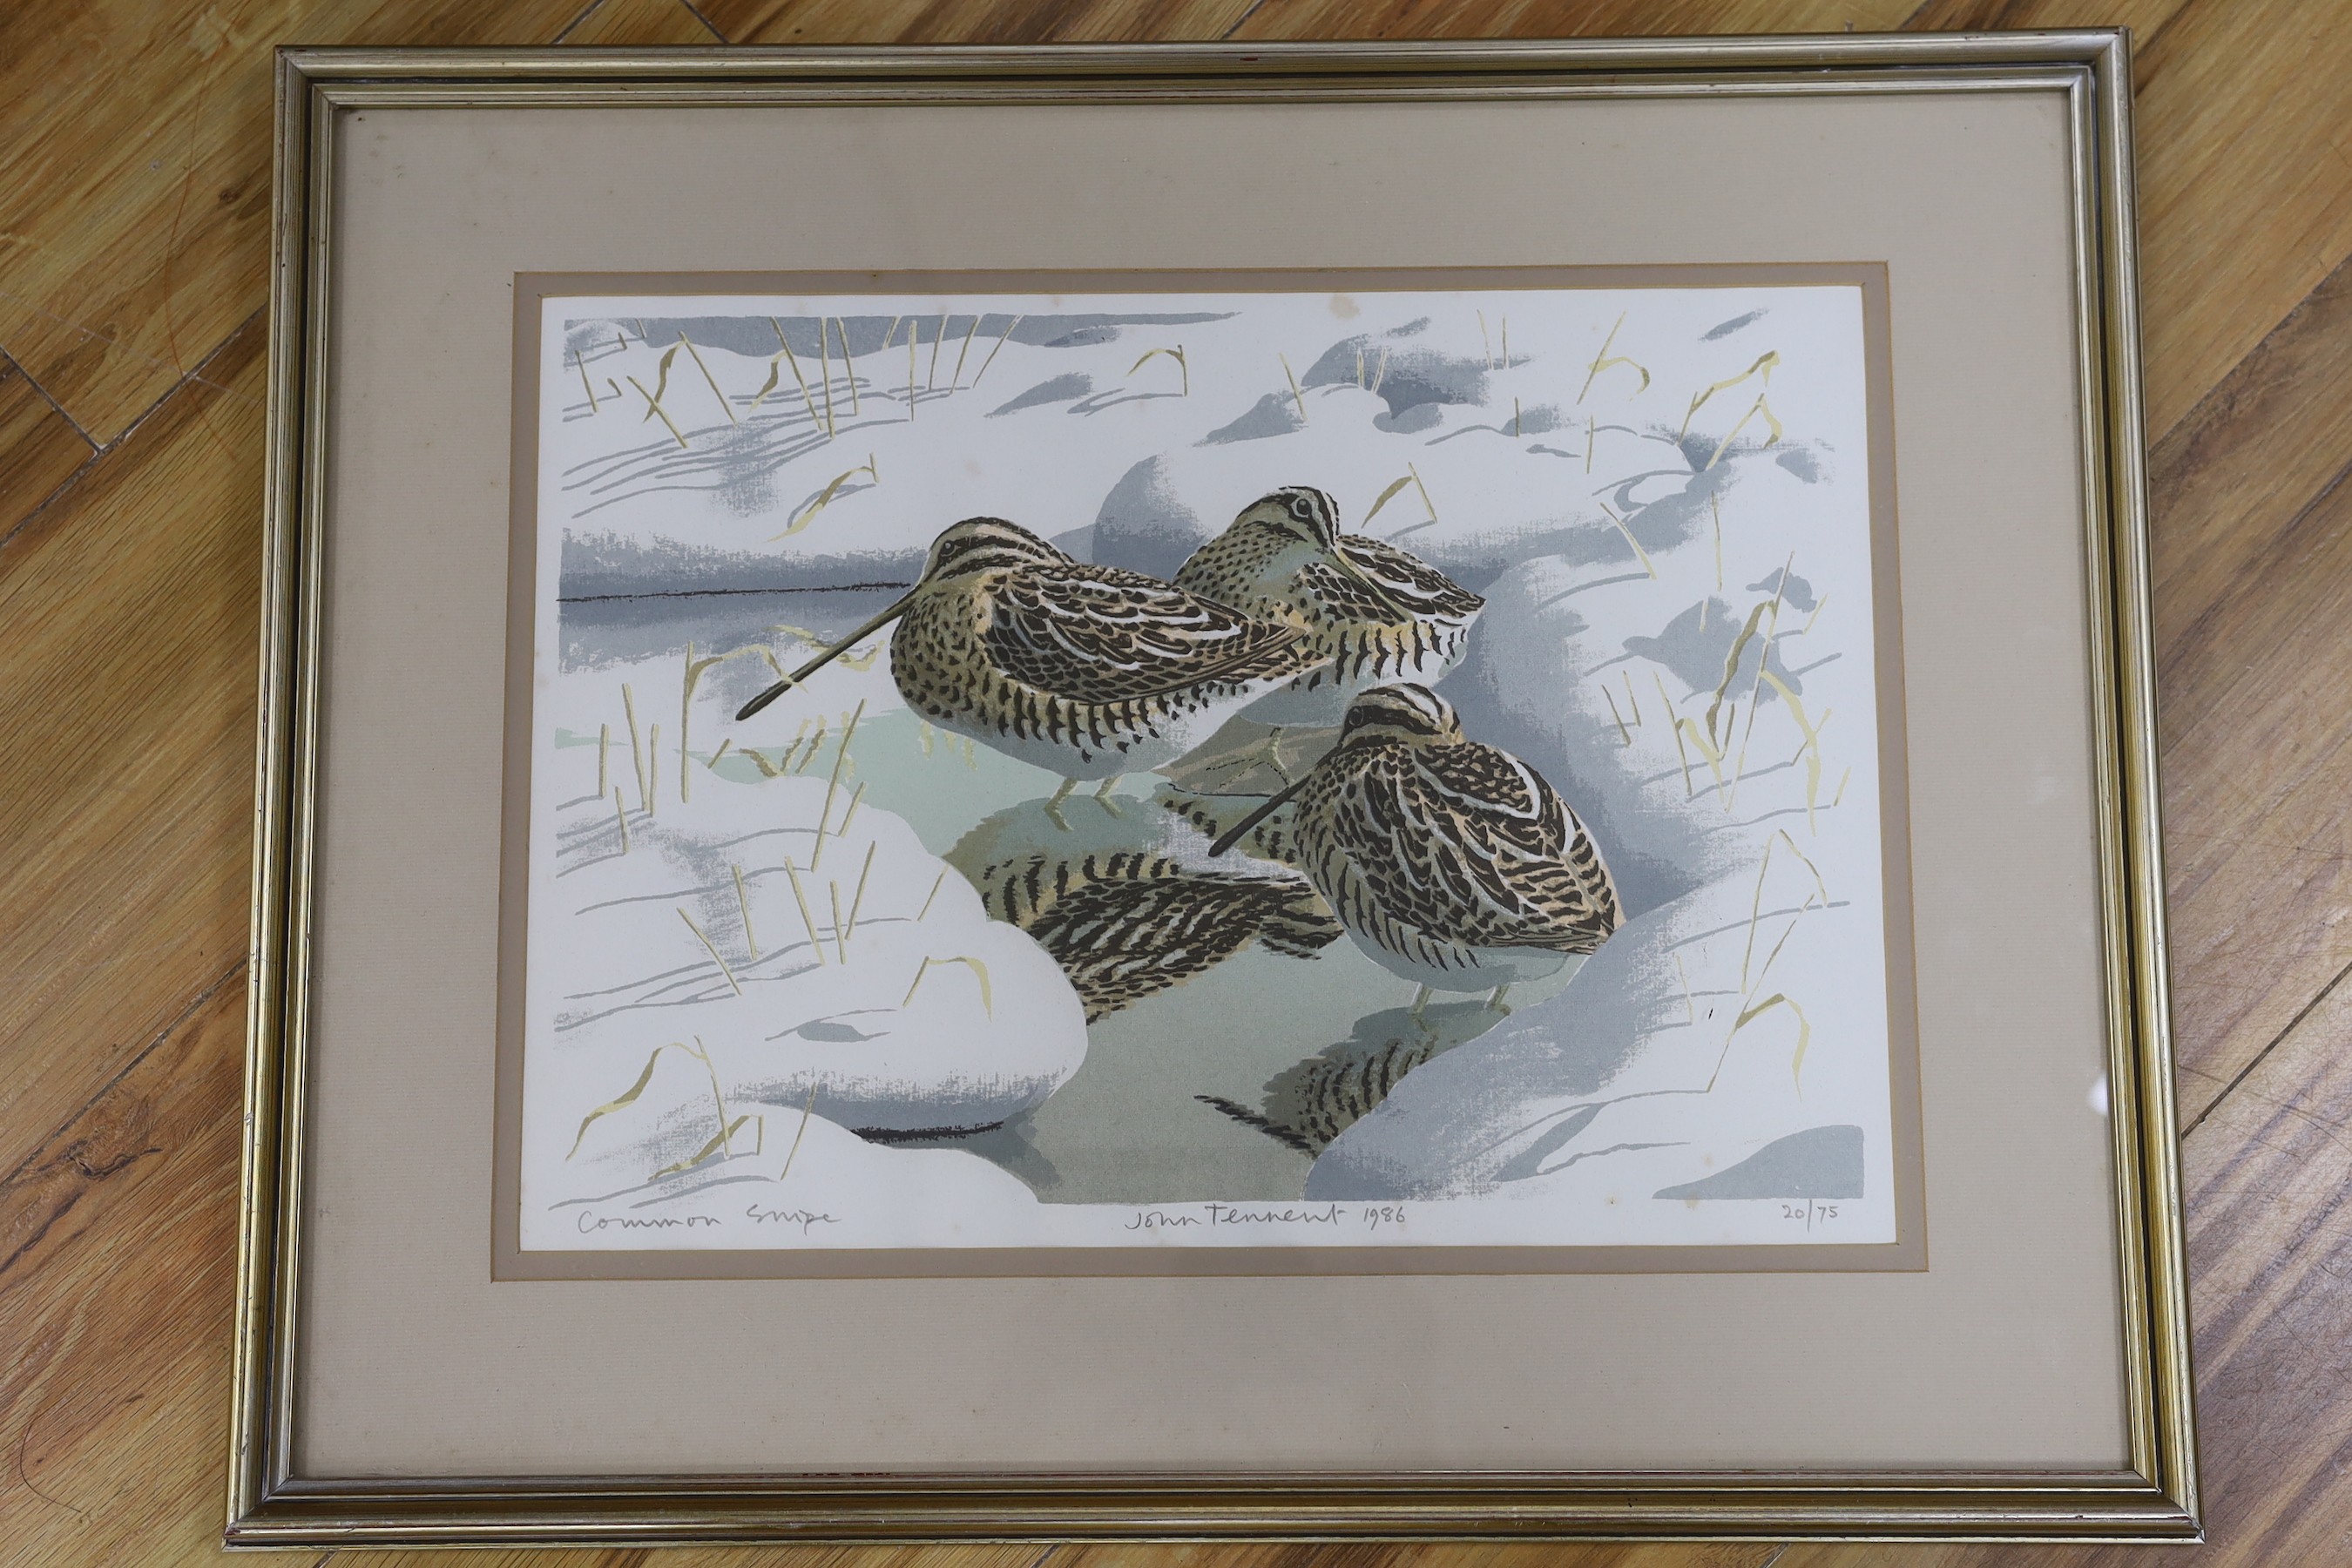 John Tennent (1926-), screenprint, 'Common Snipe', signed and dated 1986, 20/75, 31 x 43cm